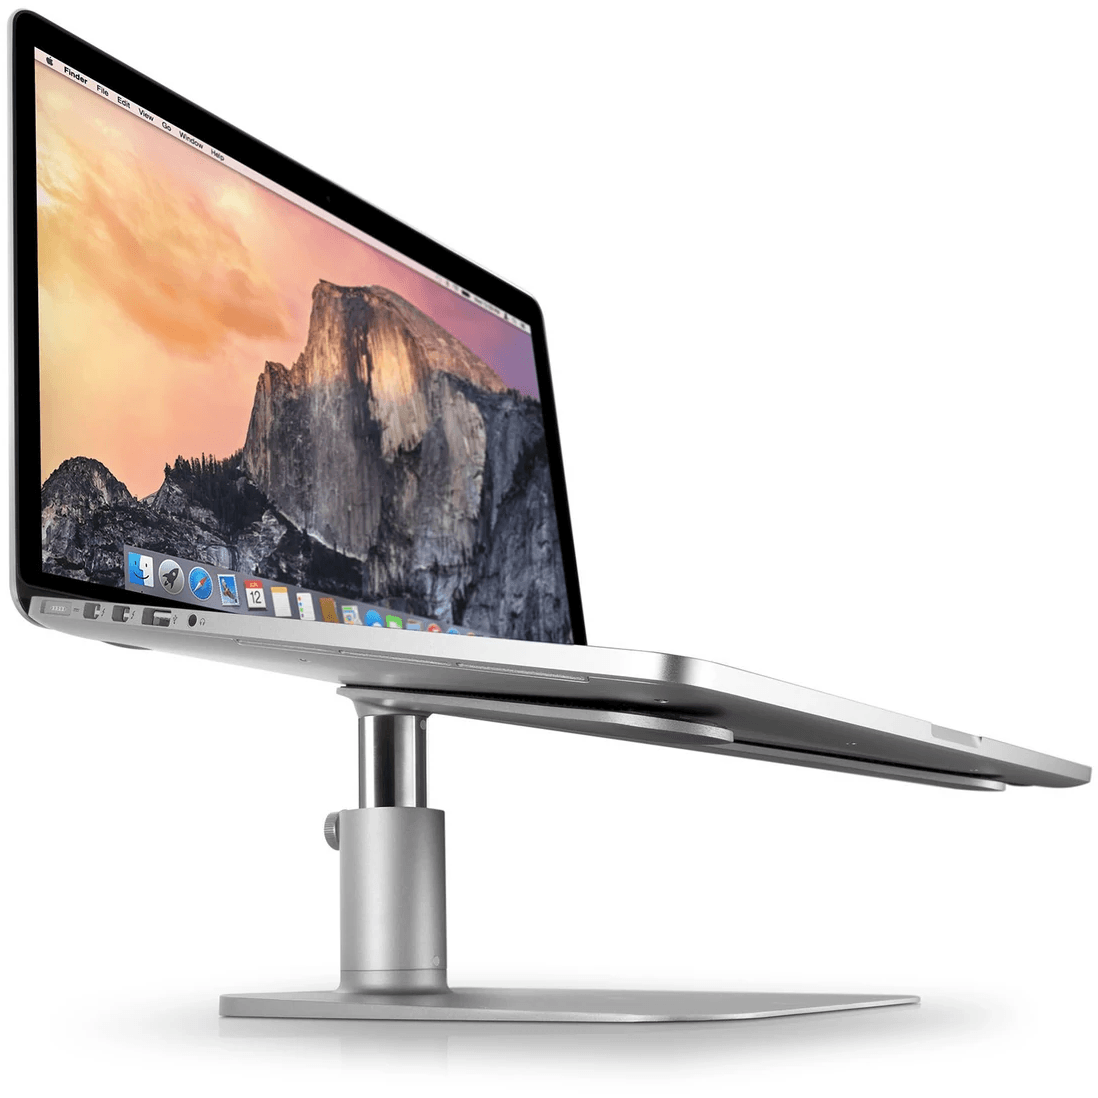 Twelve South HiRise Laptop Adjustable Stand for MacBook - Silver | 12-1222/B (7514122059964)